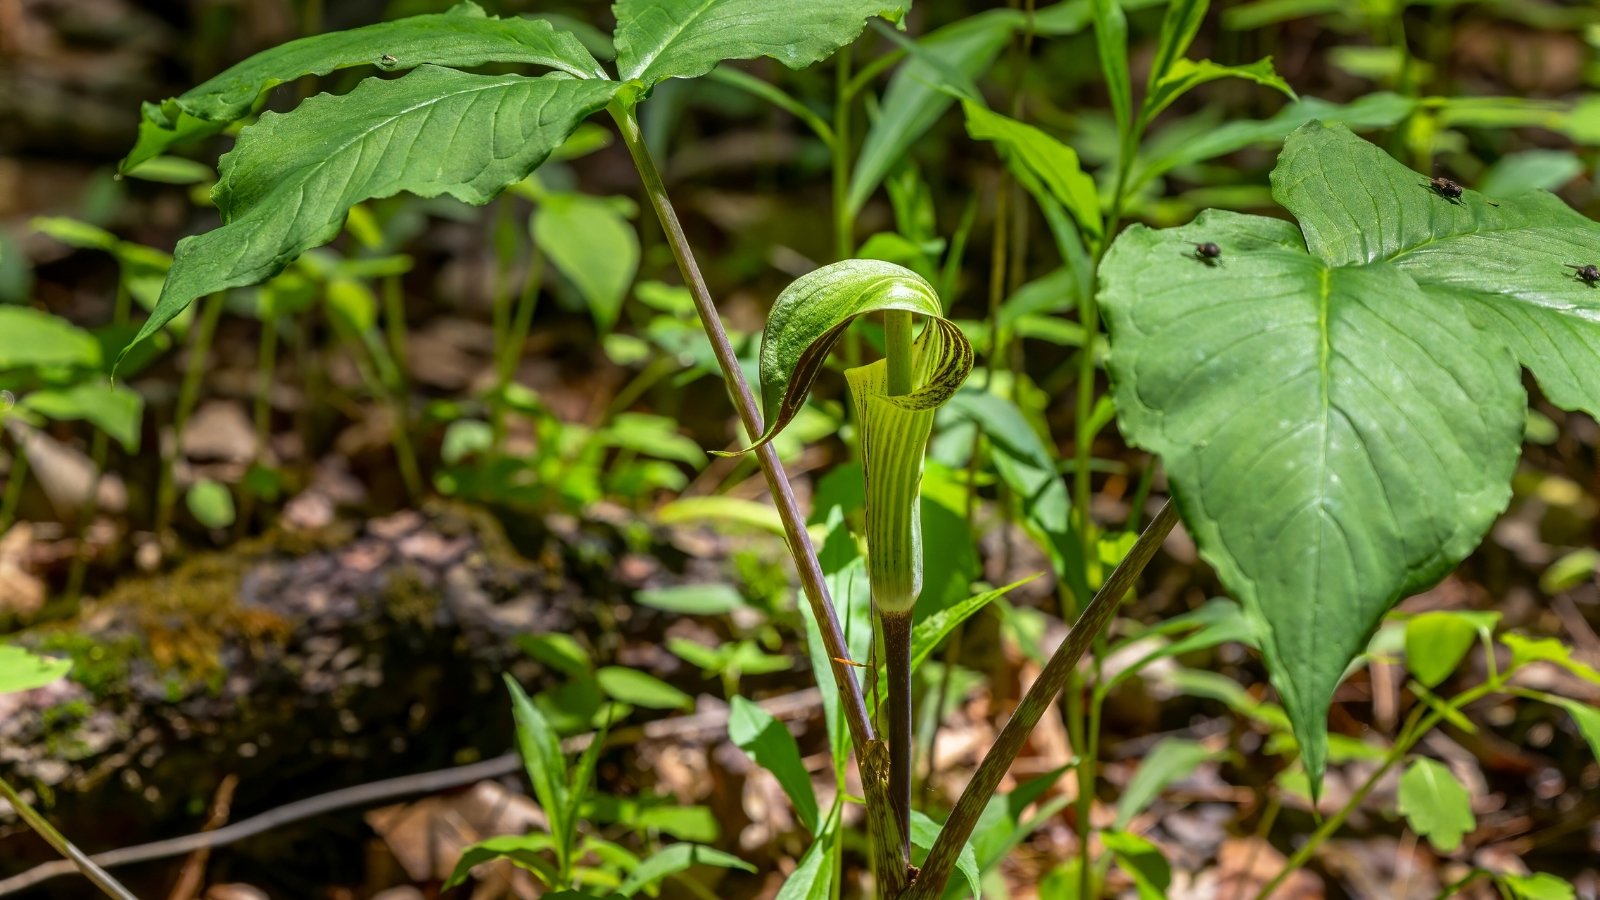 Jack-in-the-pulpit showcases a curious, pitcher-like flower with a protective hood over a central spike, framed by broad, divided leaves.